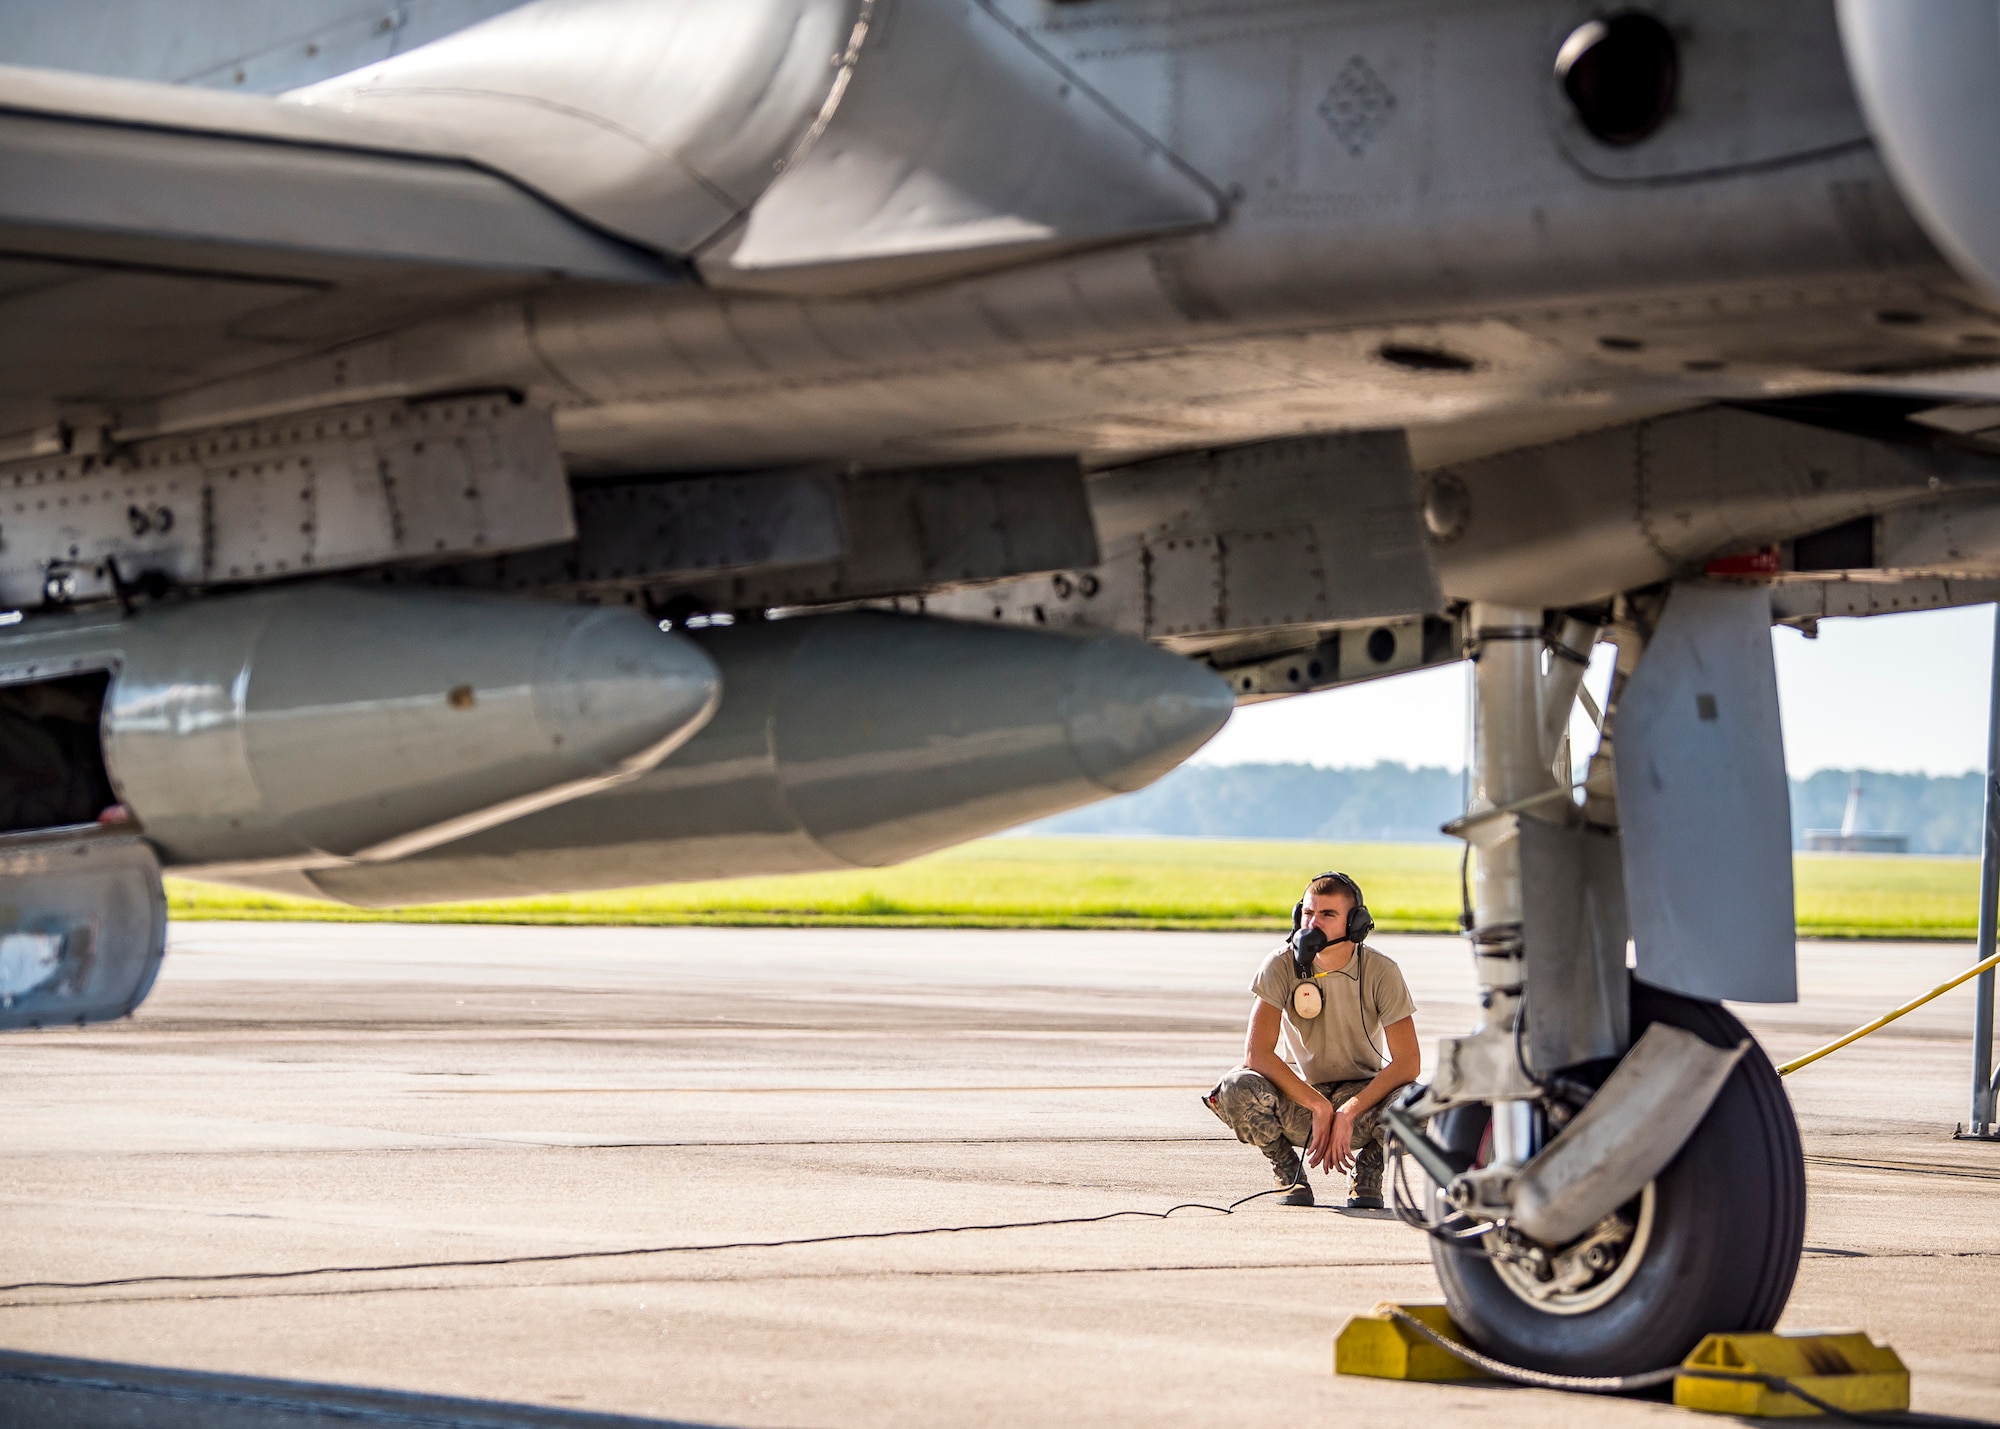 Airman 1st Class Colin Glennen, 74th Aircraft Maintenance Unit crew chief, inspects an A-10C Thunderbolt II, Aug. 30, 2019, at Moody Air Force Base, Ga. Moody’s A-10s were relocated to Little Rock AFB, Ark. in anticipation of Hurricane Dorian. (U.S. Air Force photo by Airman 1st Class Eugene Oliver)